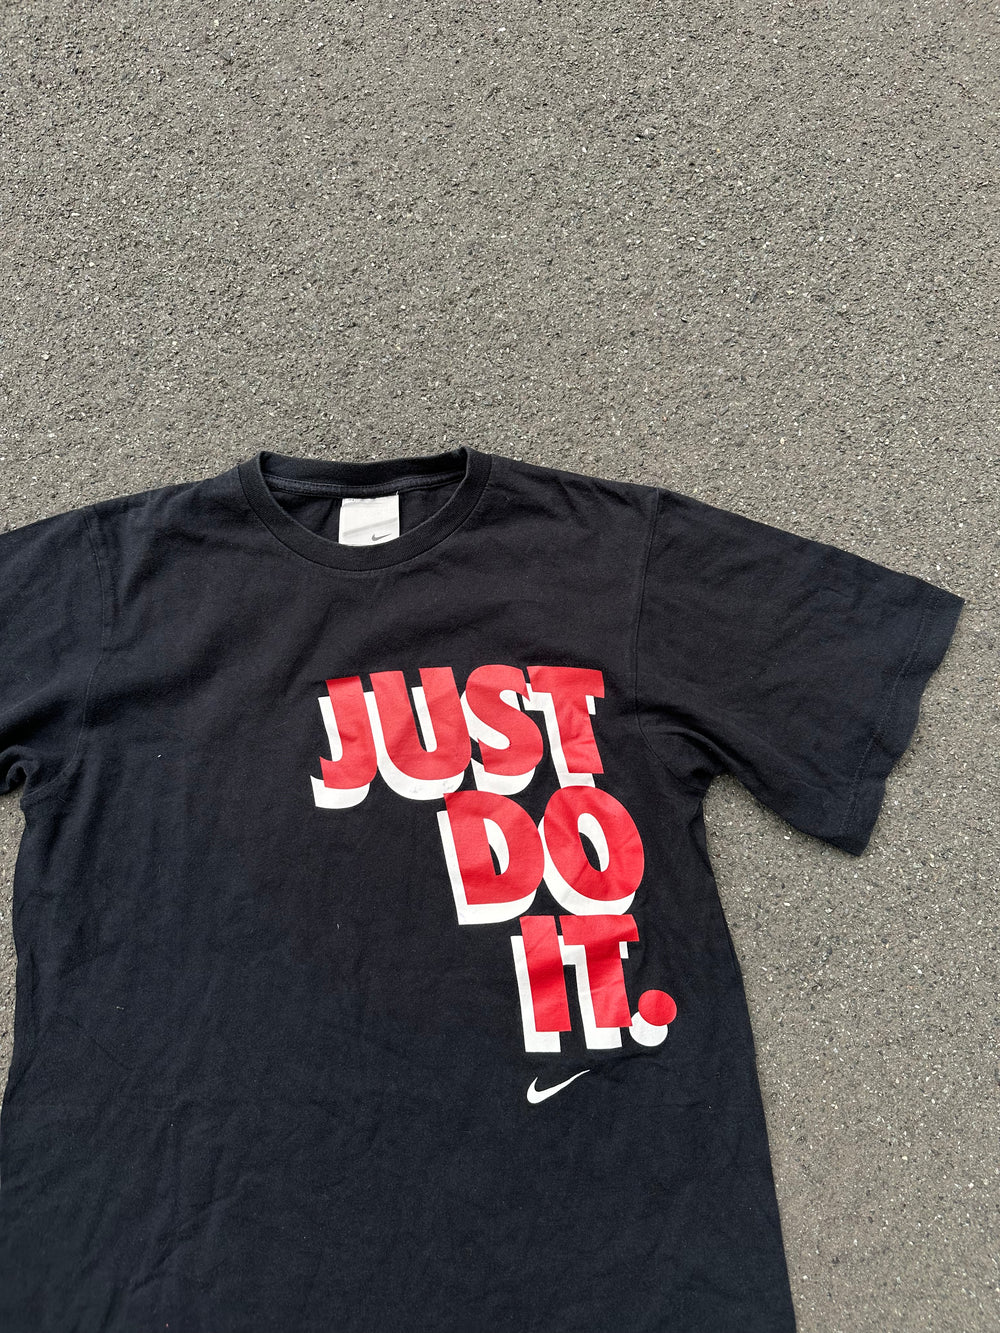 Early 2000s Nike Just Do It T-Shirt (S)